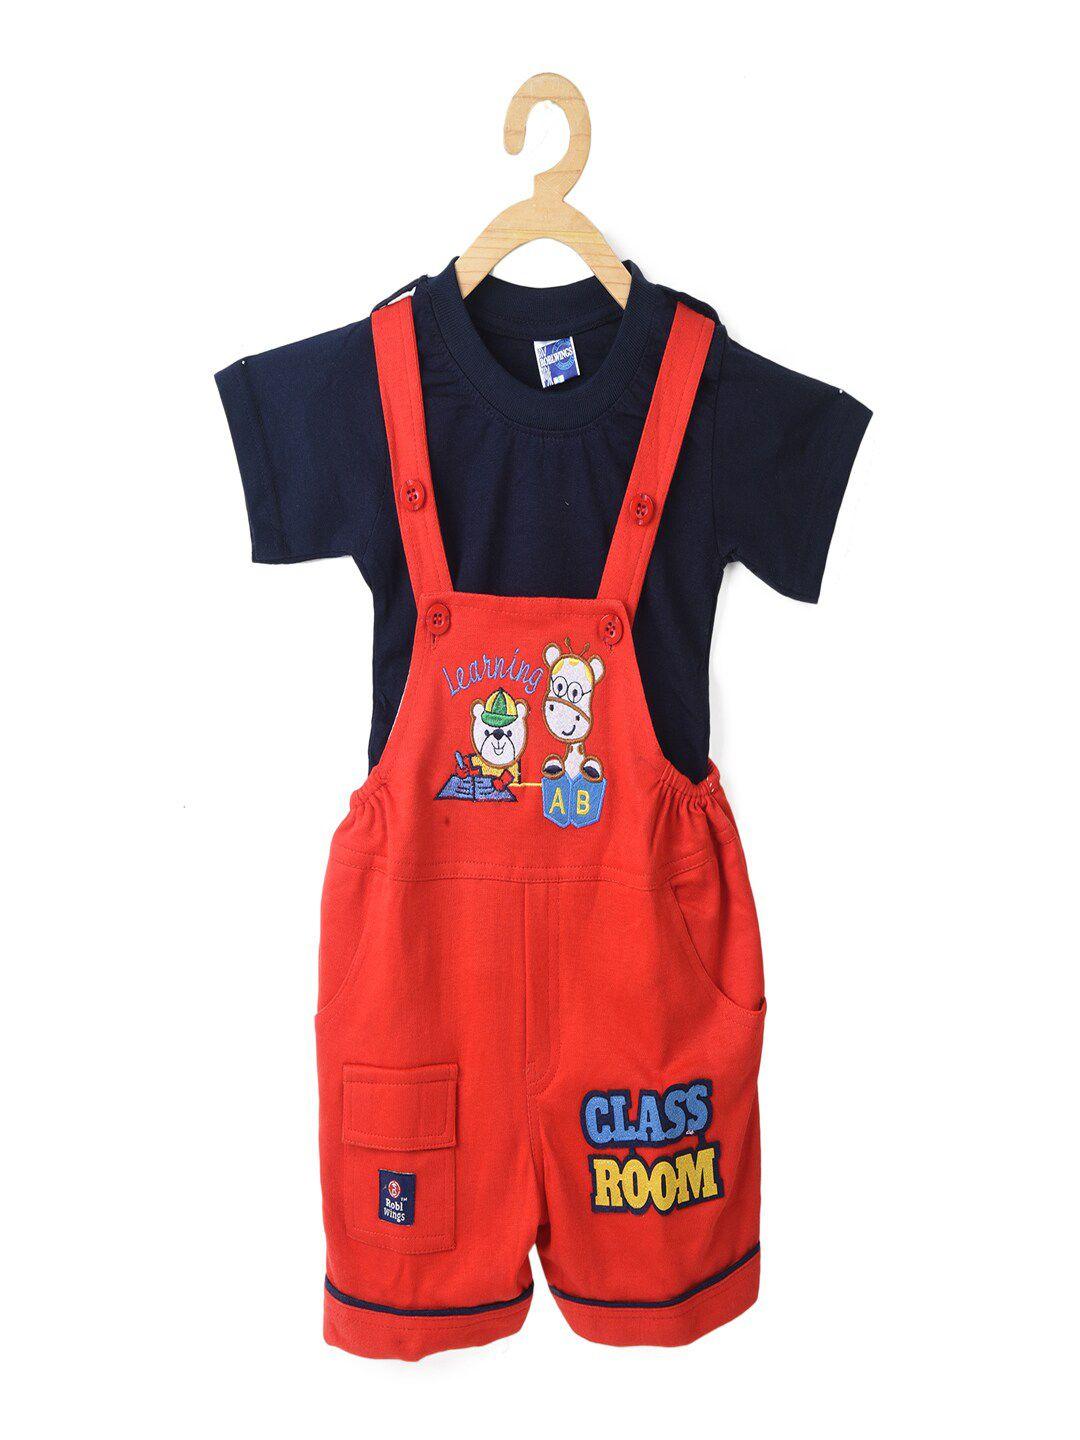 baesd kids embellished pure cotton dungaree with t-shirt